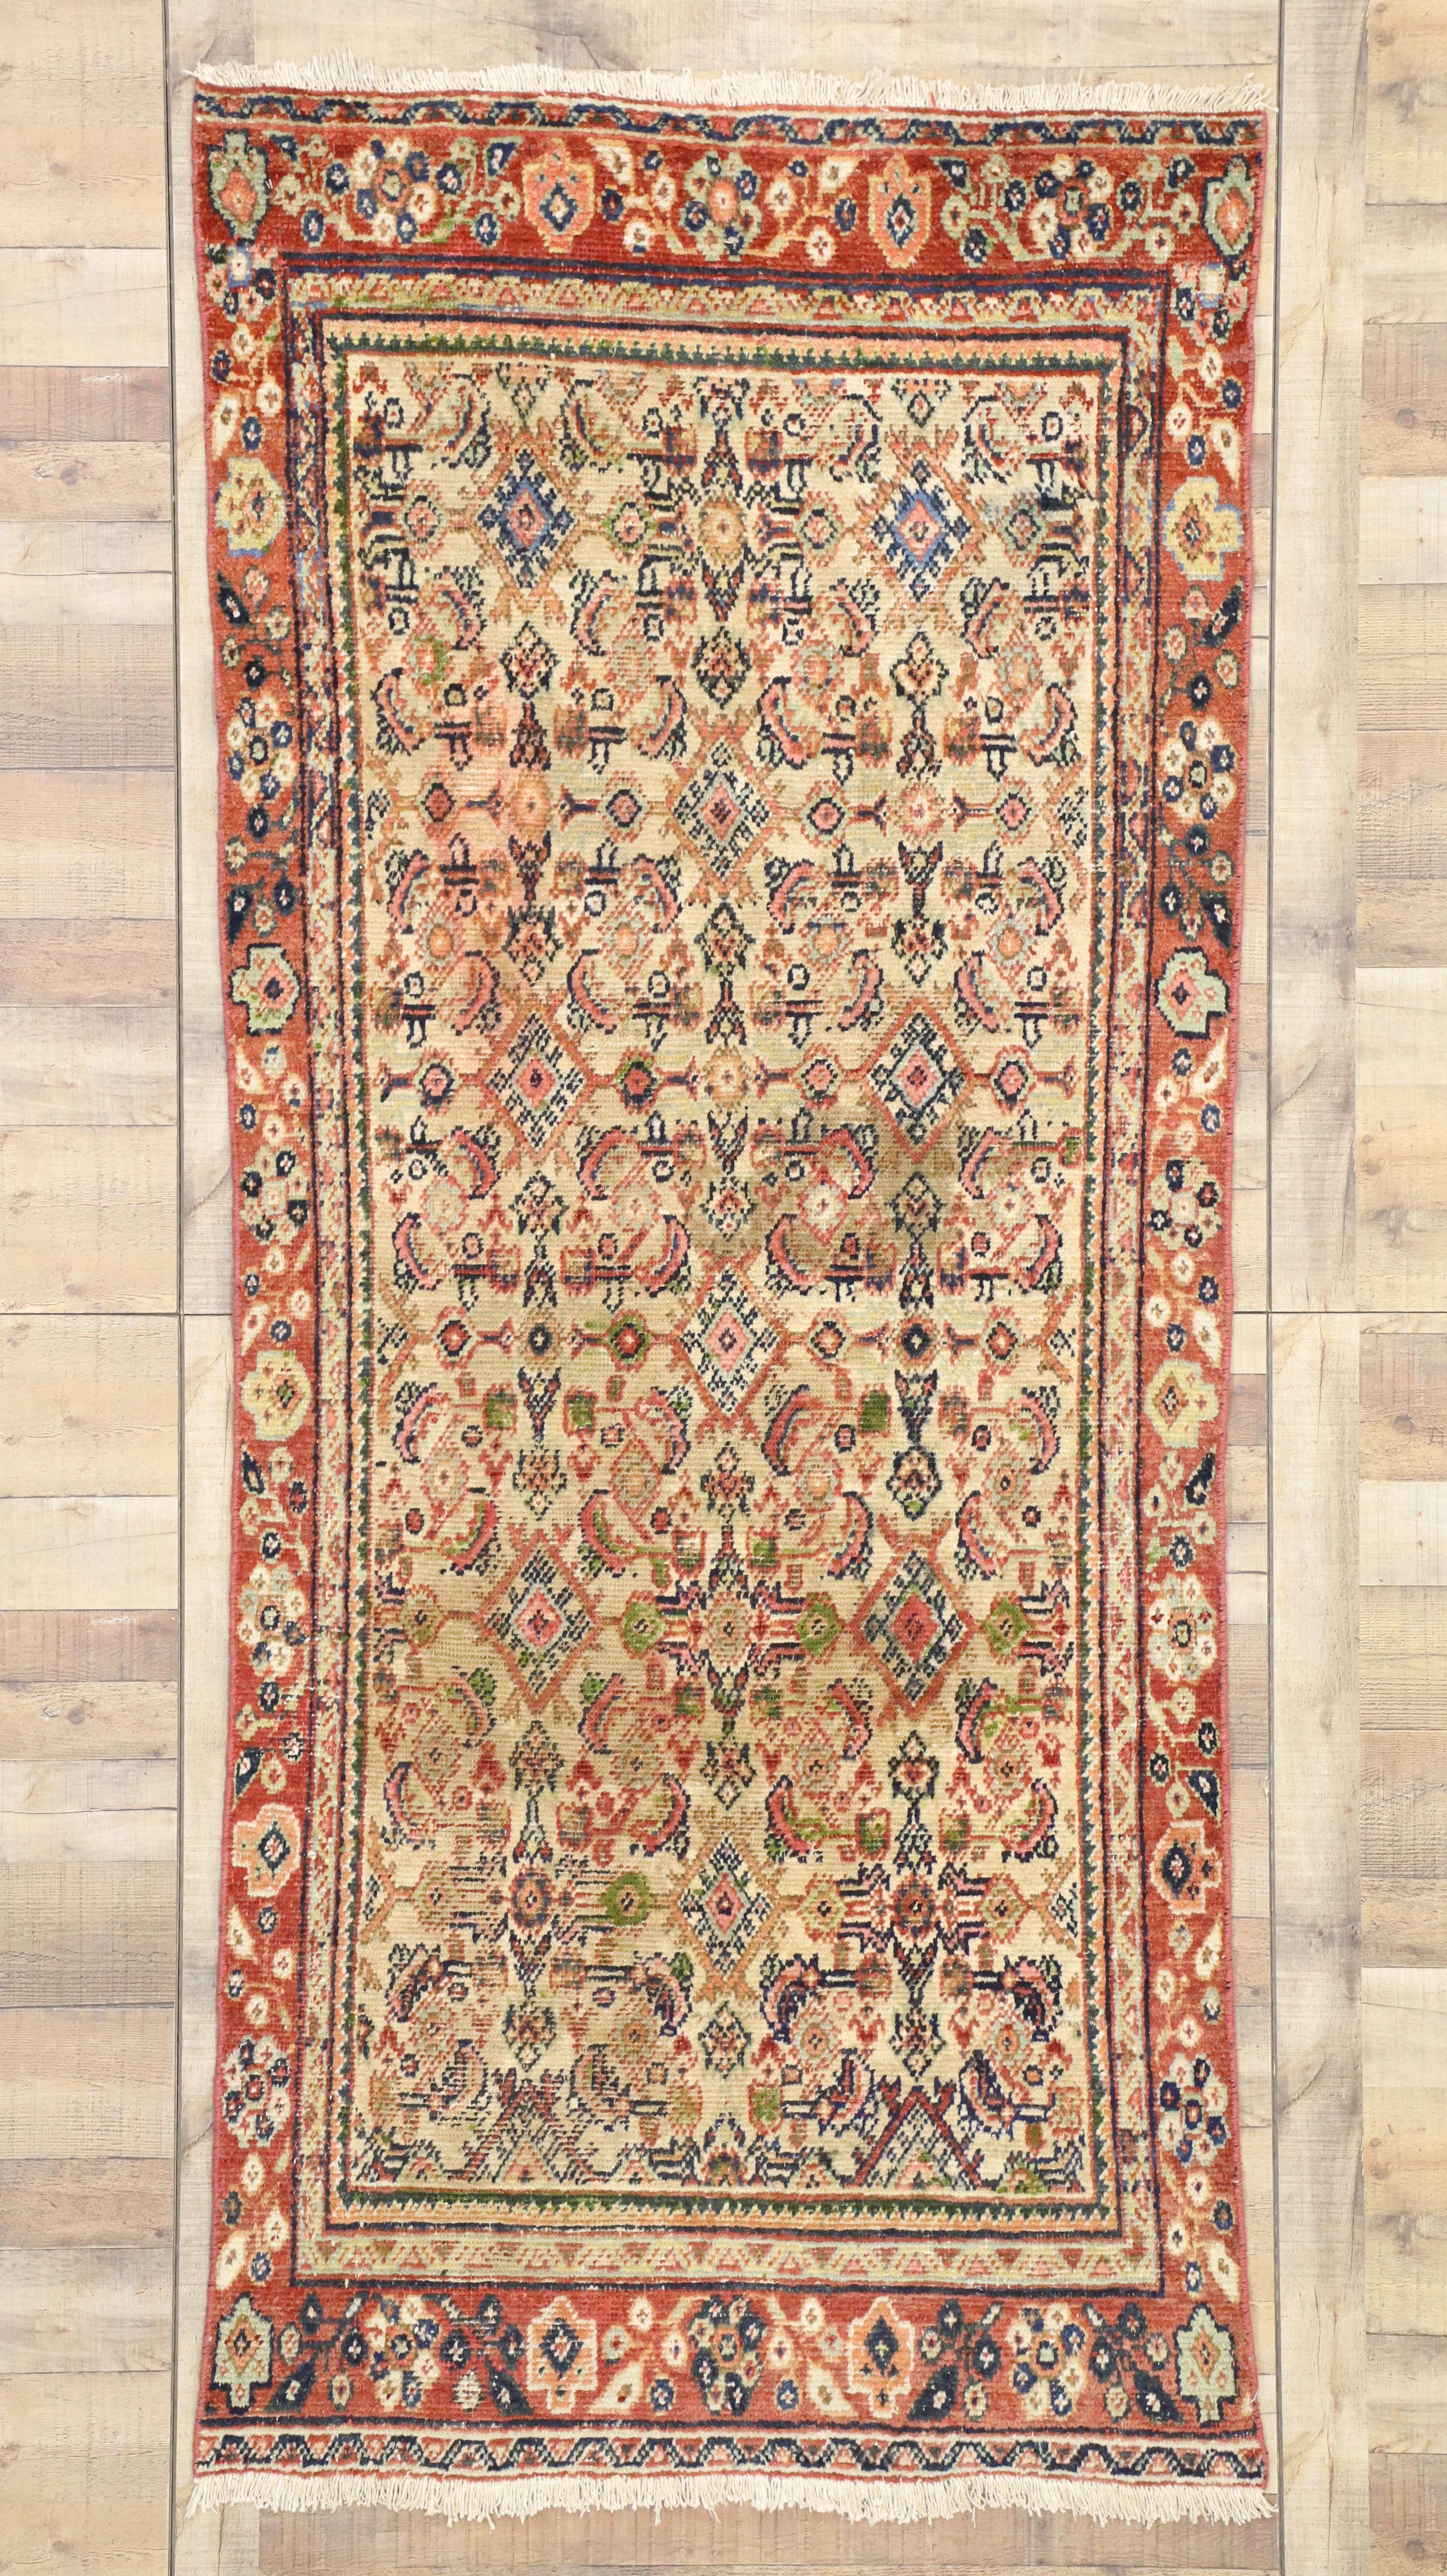 75196, distressed vintage Persian Mahal runner, rustic hallway runner. A dazzling visual array meets the eye in this distressed vintage Persian Mahal runner. Rustic yet bright and colorful, this Persian hallway runner delights and inspires with